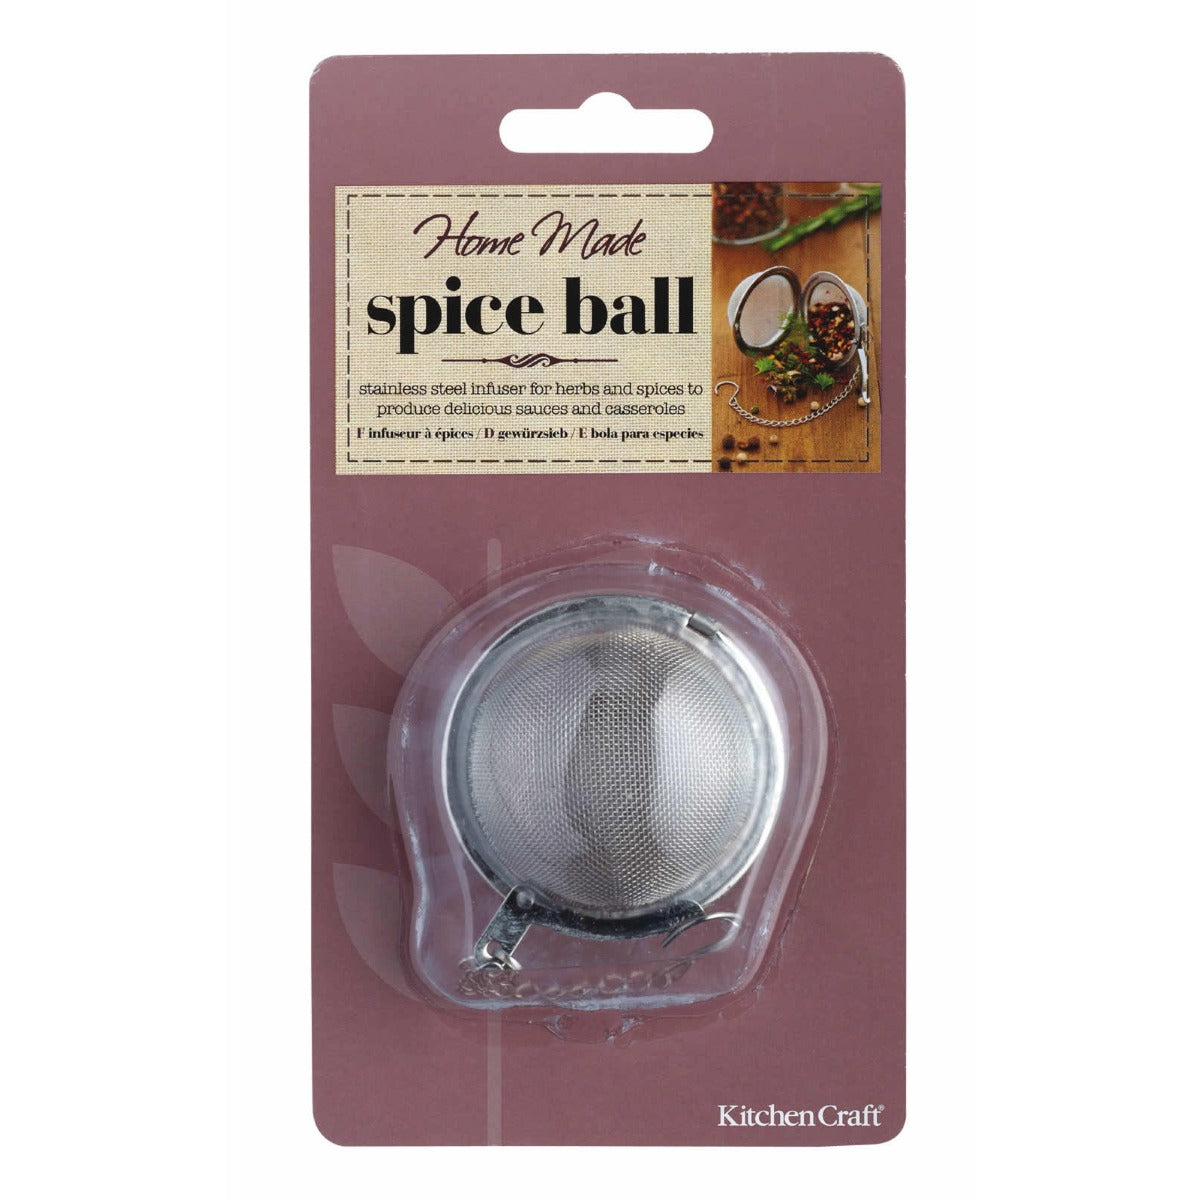 Home Made Stainless Steel Spice Ball